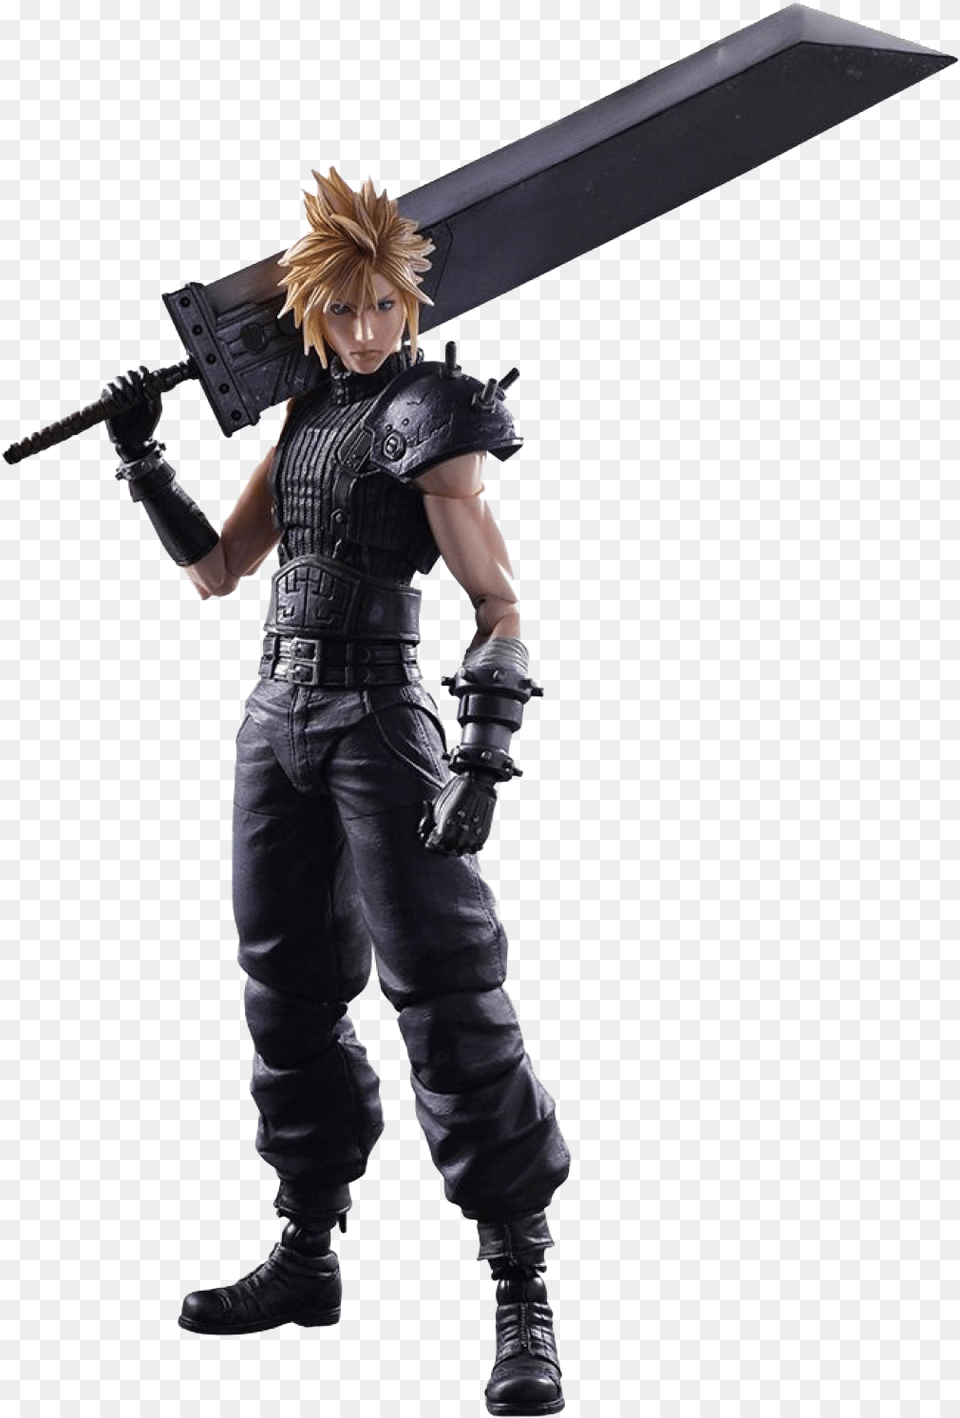 Final Fantasy Vii Remake Transparent Images All Cloud Strife, Weapon, Sword, Person, Clothing Png Image